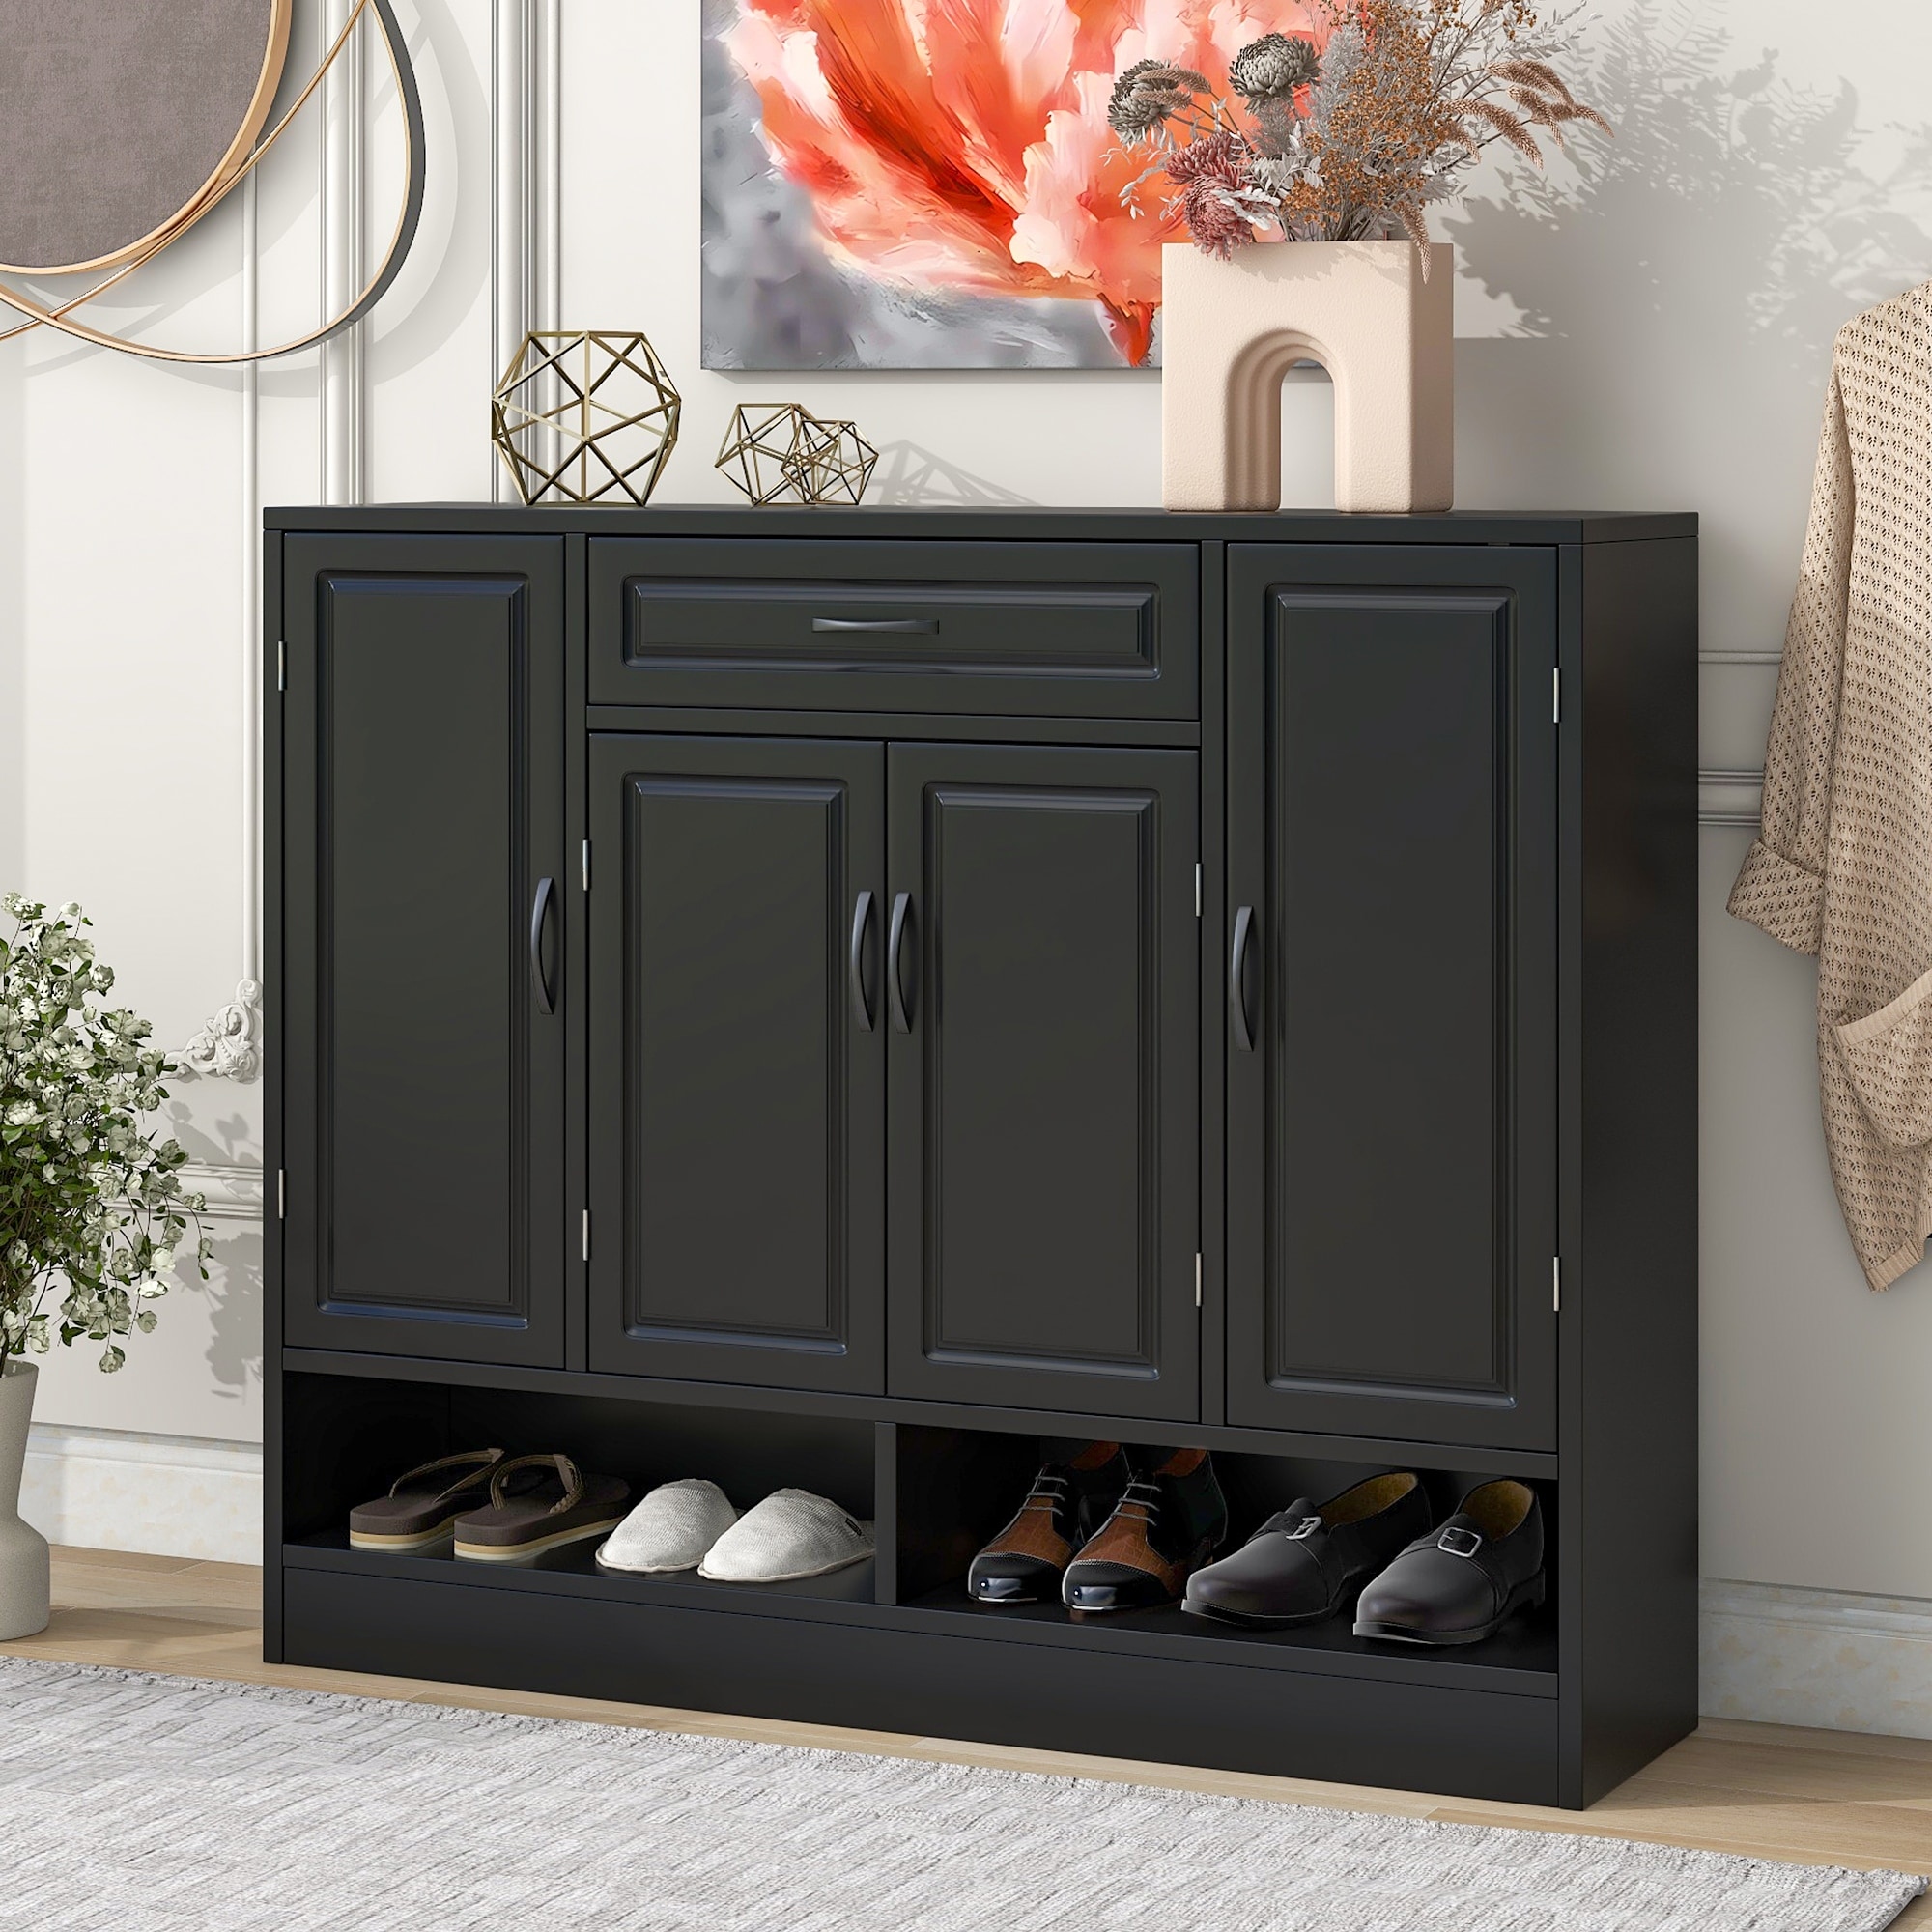 https://ak1.ostkcdn.com/images/products/is/images/direct/96a216d4923386daa822f686ab53413973995496/Shoe-Cabinet-for-Entryway%2C-Modern-Free-Standing-Shoe-Storage-Cabinets%2C-Shoe-Organizer-Cabinet-with-Adjustable-Shelves.jpg